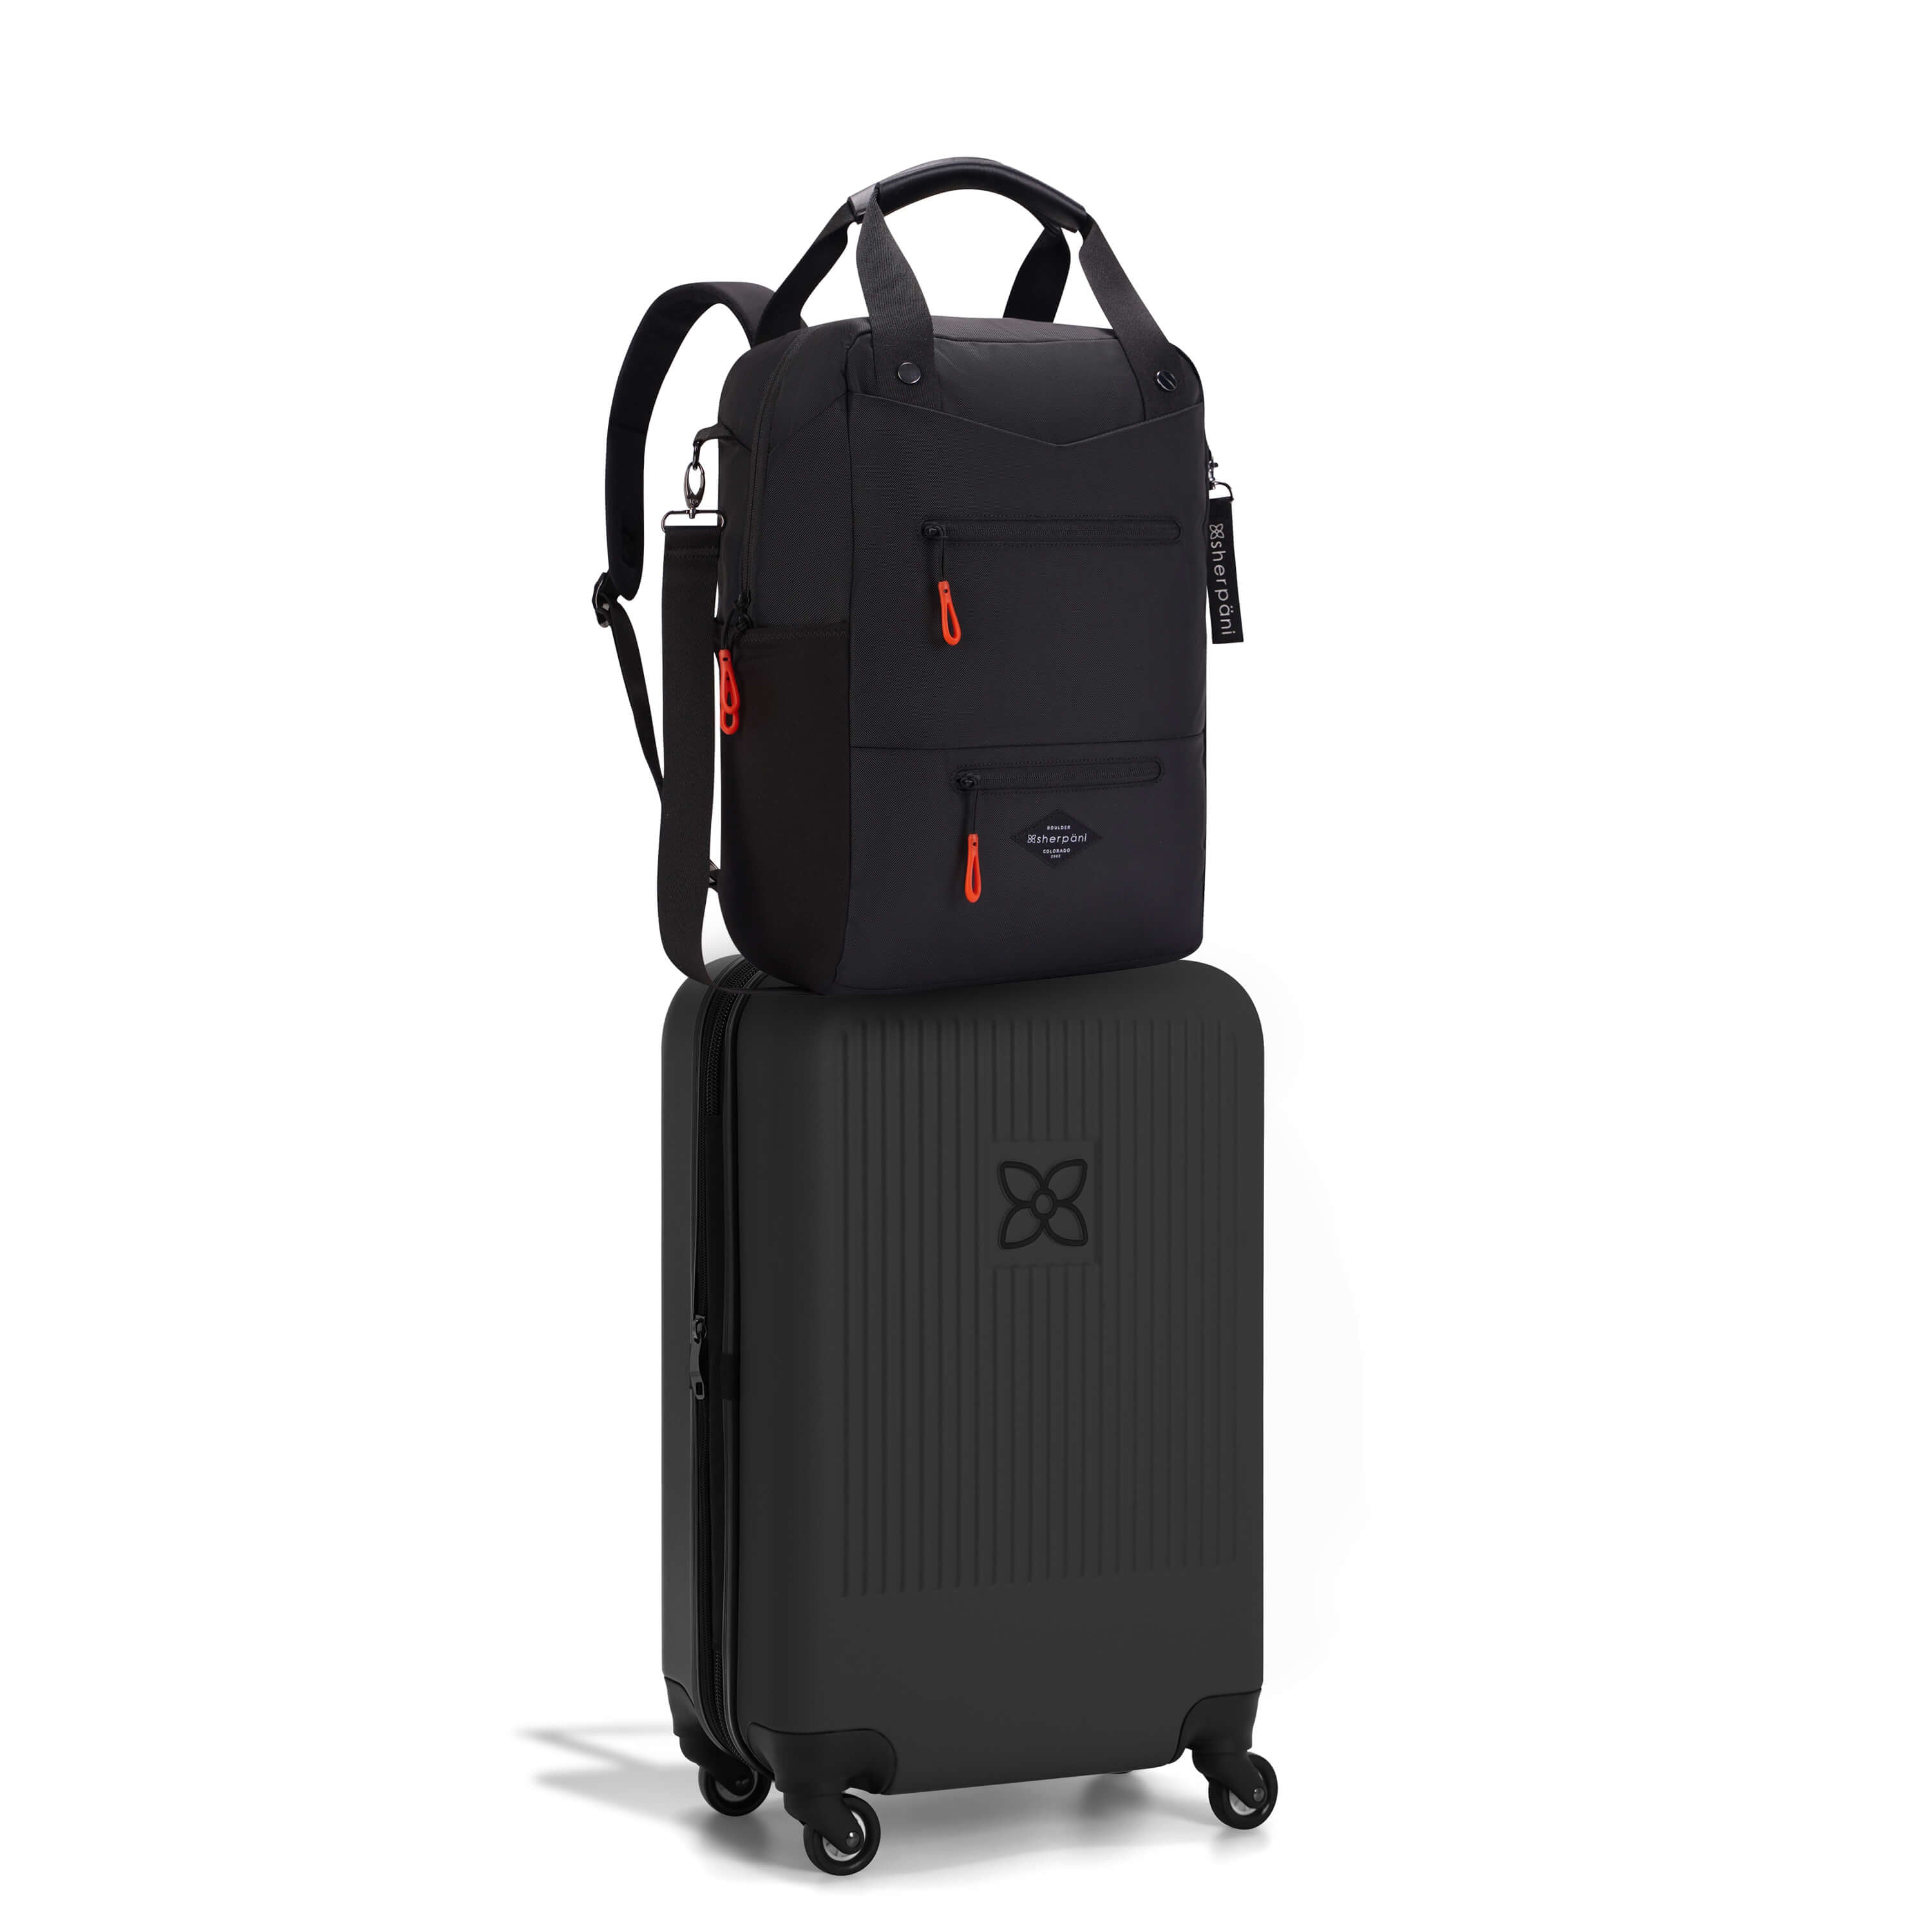 Sherpani travel Carry on Bundle in Classic Black. Hard shell luggage the Meridian and convertible travel bag the Camden bundled together at a discounted rate. 